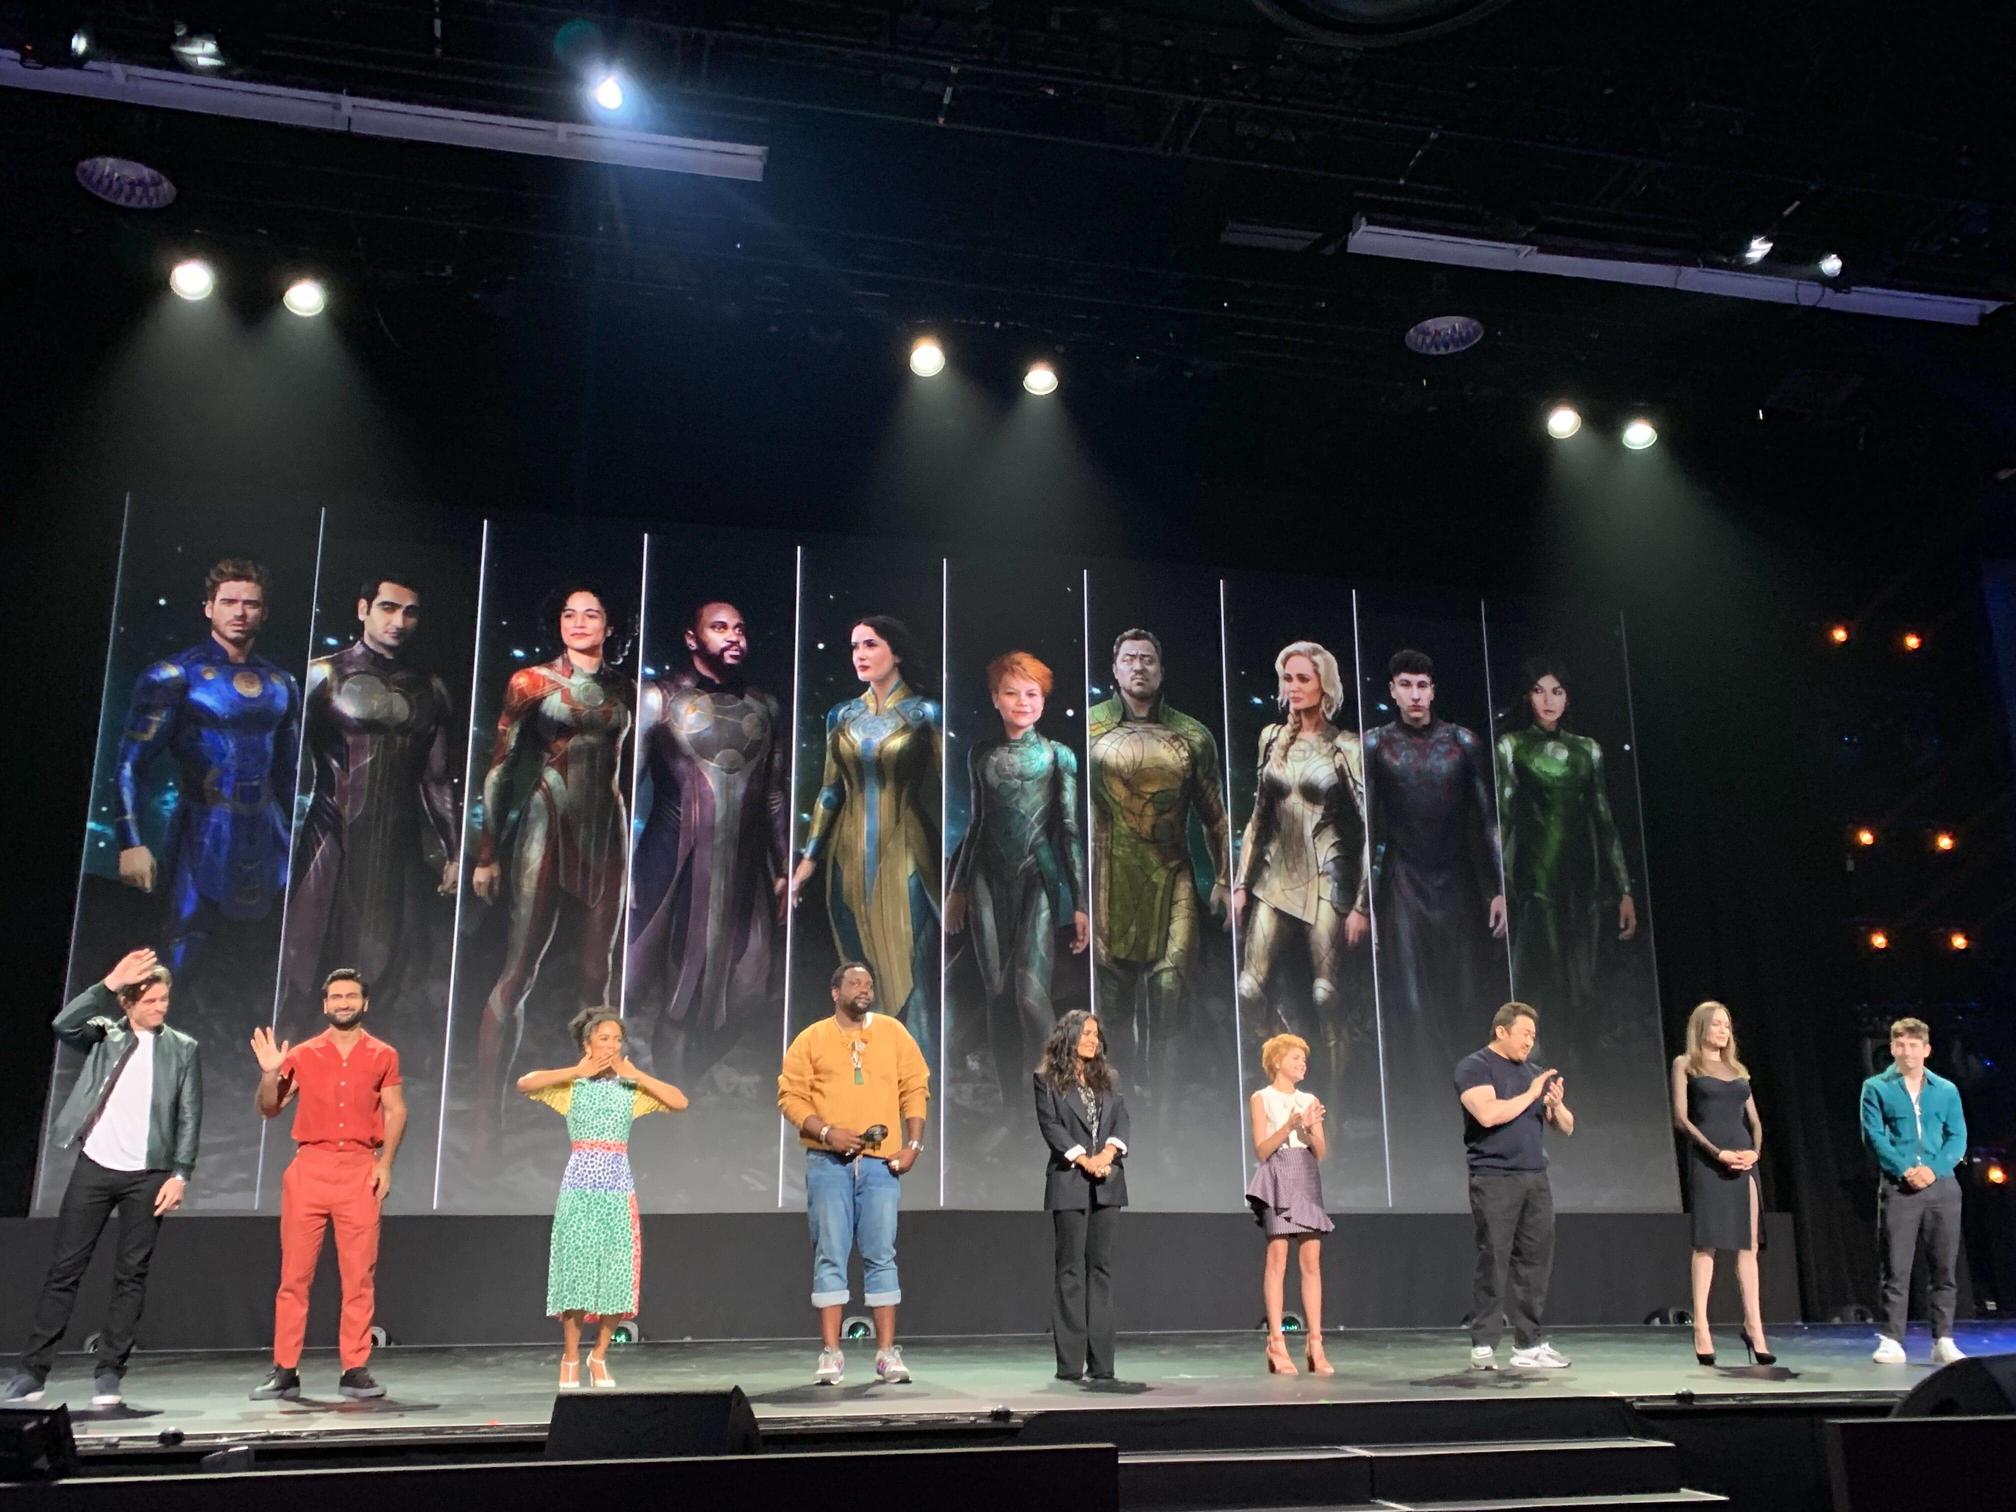 the-eternals-cast-gathered-on-stage-at-disneys-d23-convention-in-august-2019.jpeg